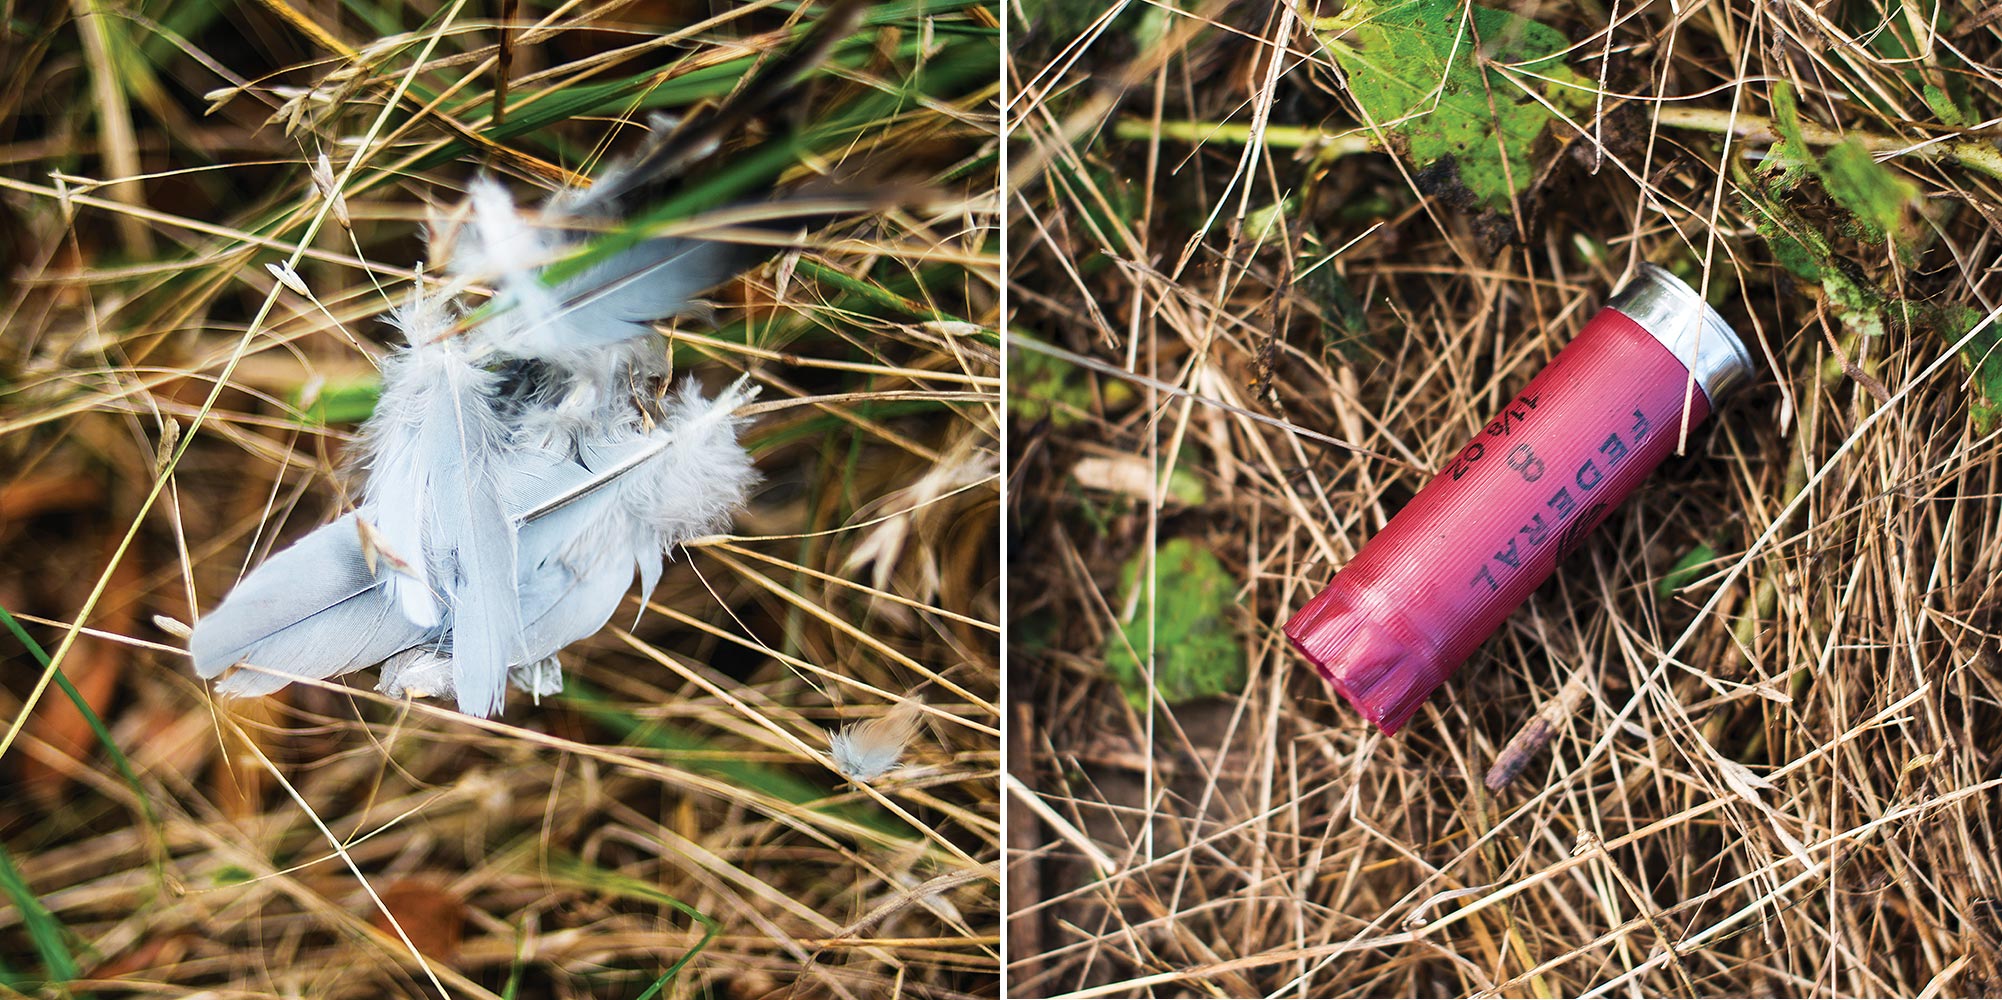 Diptych of dove feathers on grass and spent shotgun shell on grass